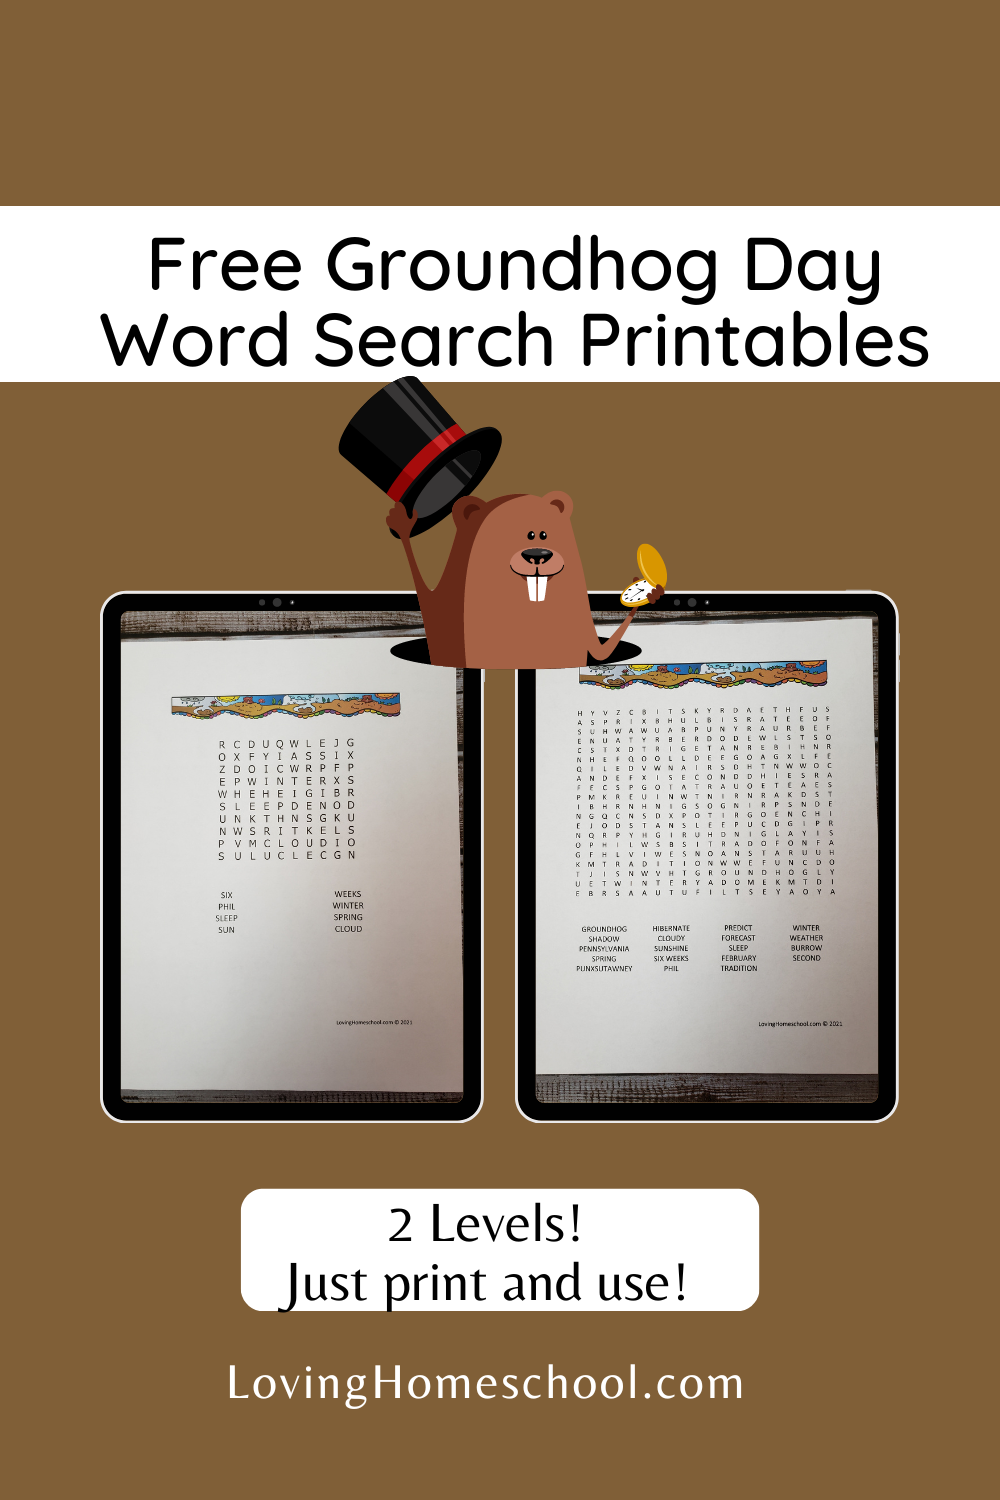 Groundhog Day Word Search Pinterest Pin